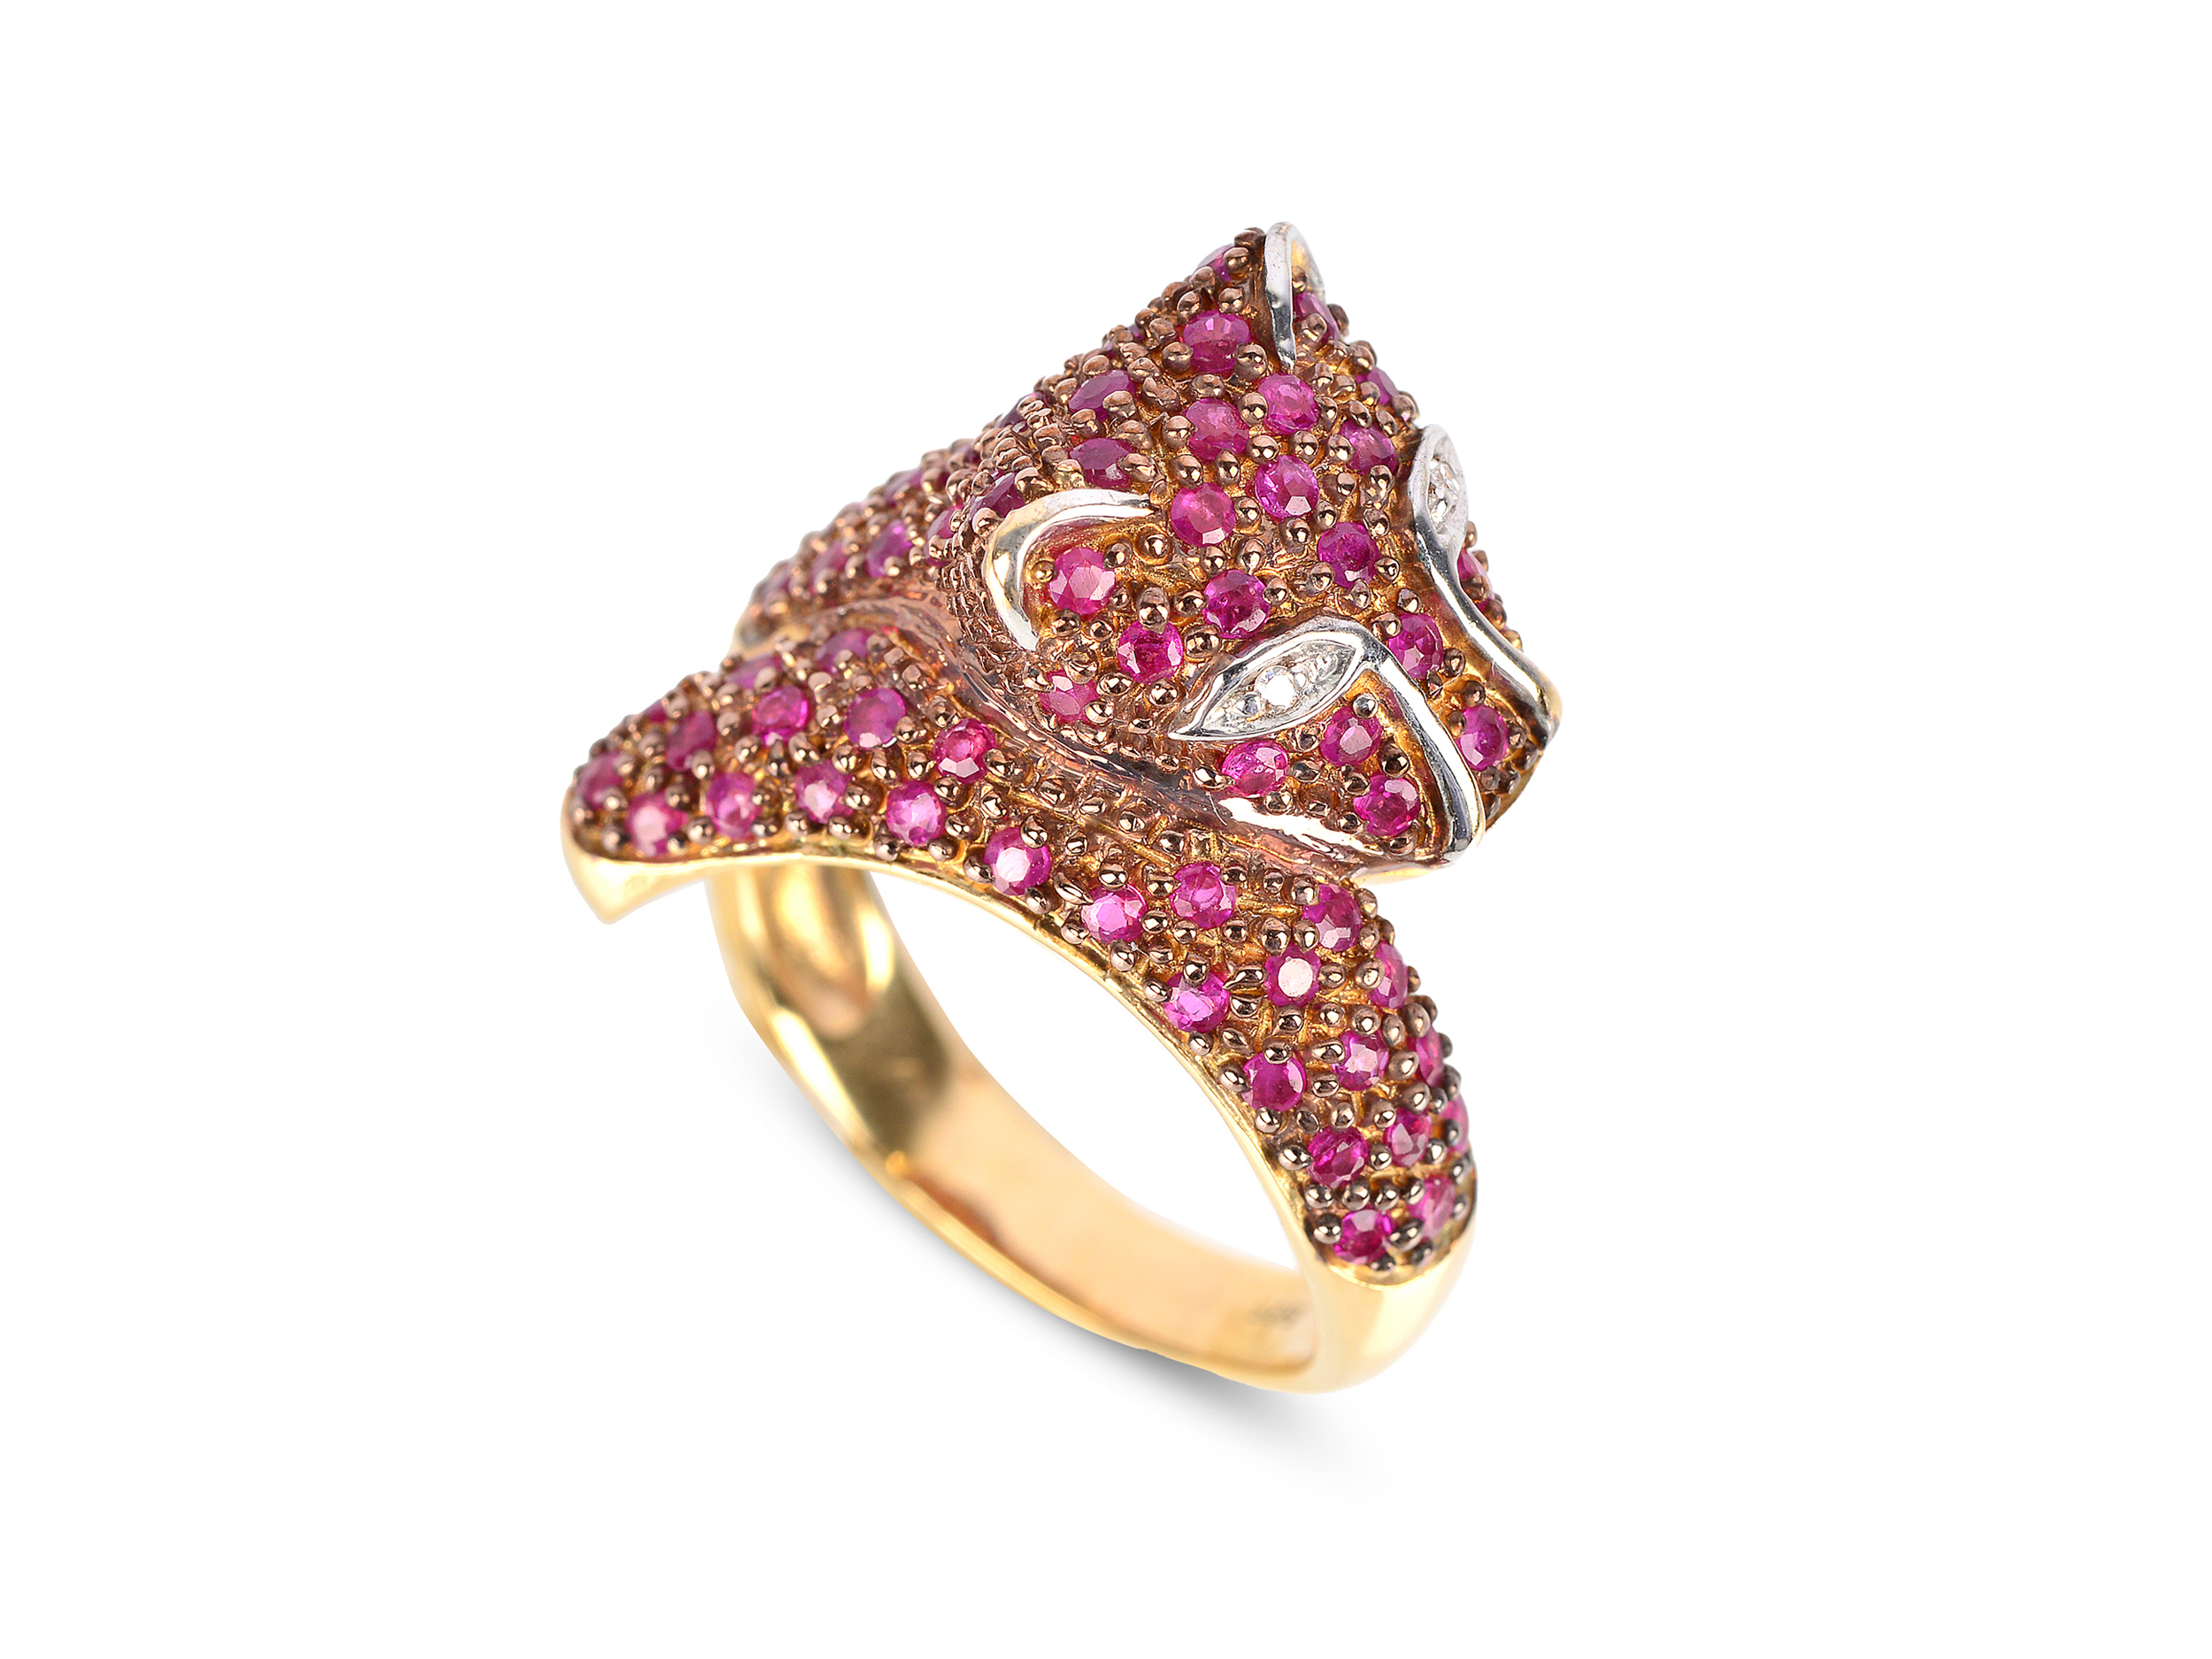 Ring in the shape of a panther, 14kt gold, Red coloured stones (rubies?) - Image 2 of 3